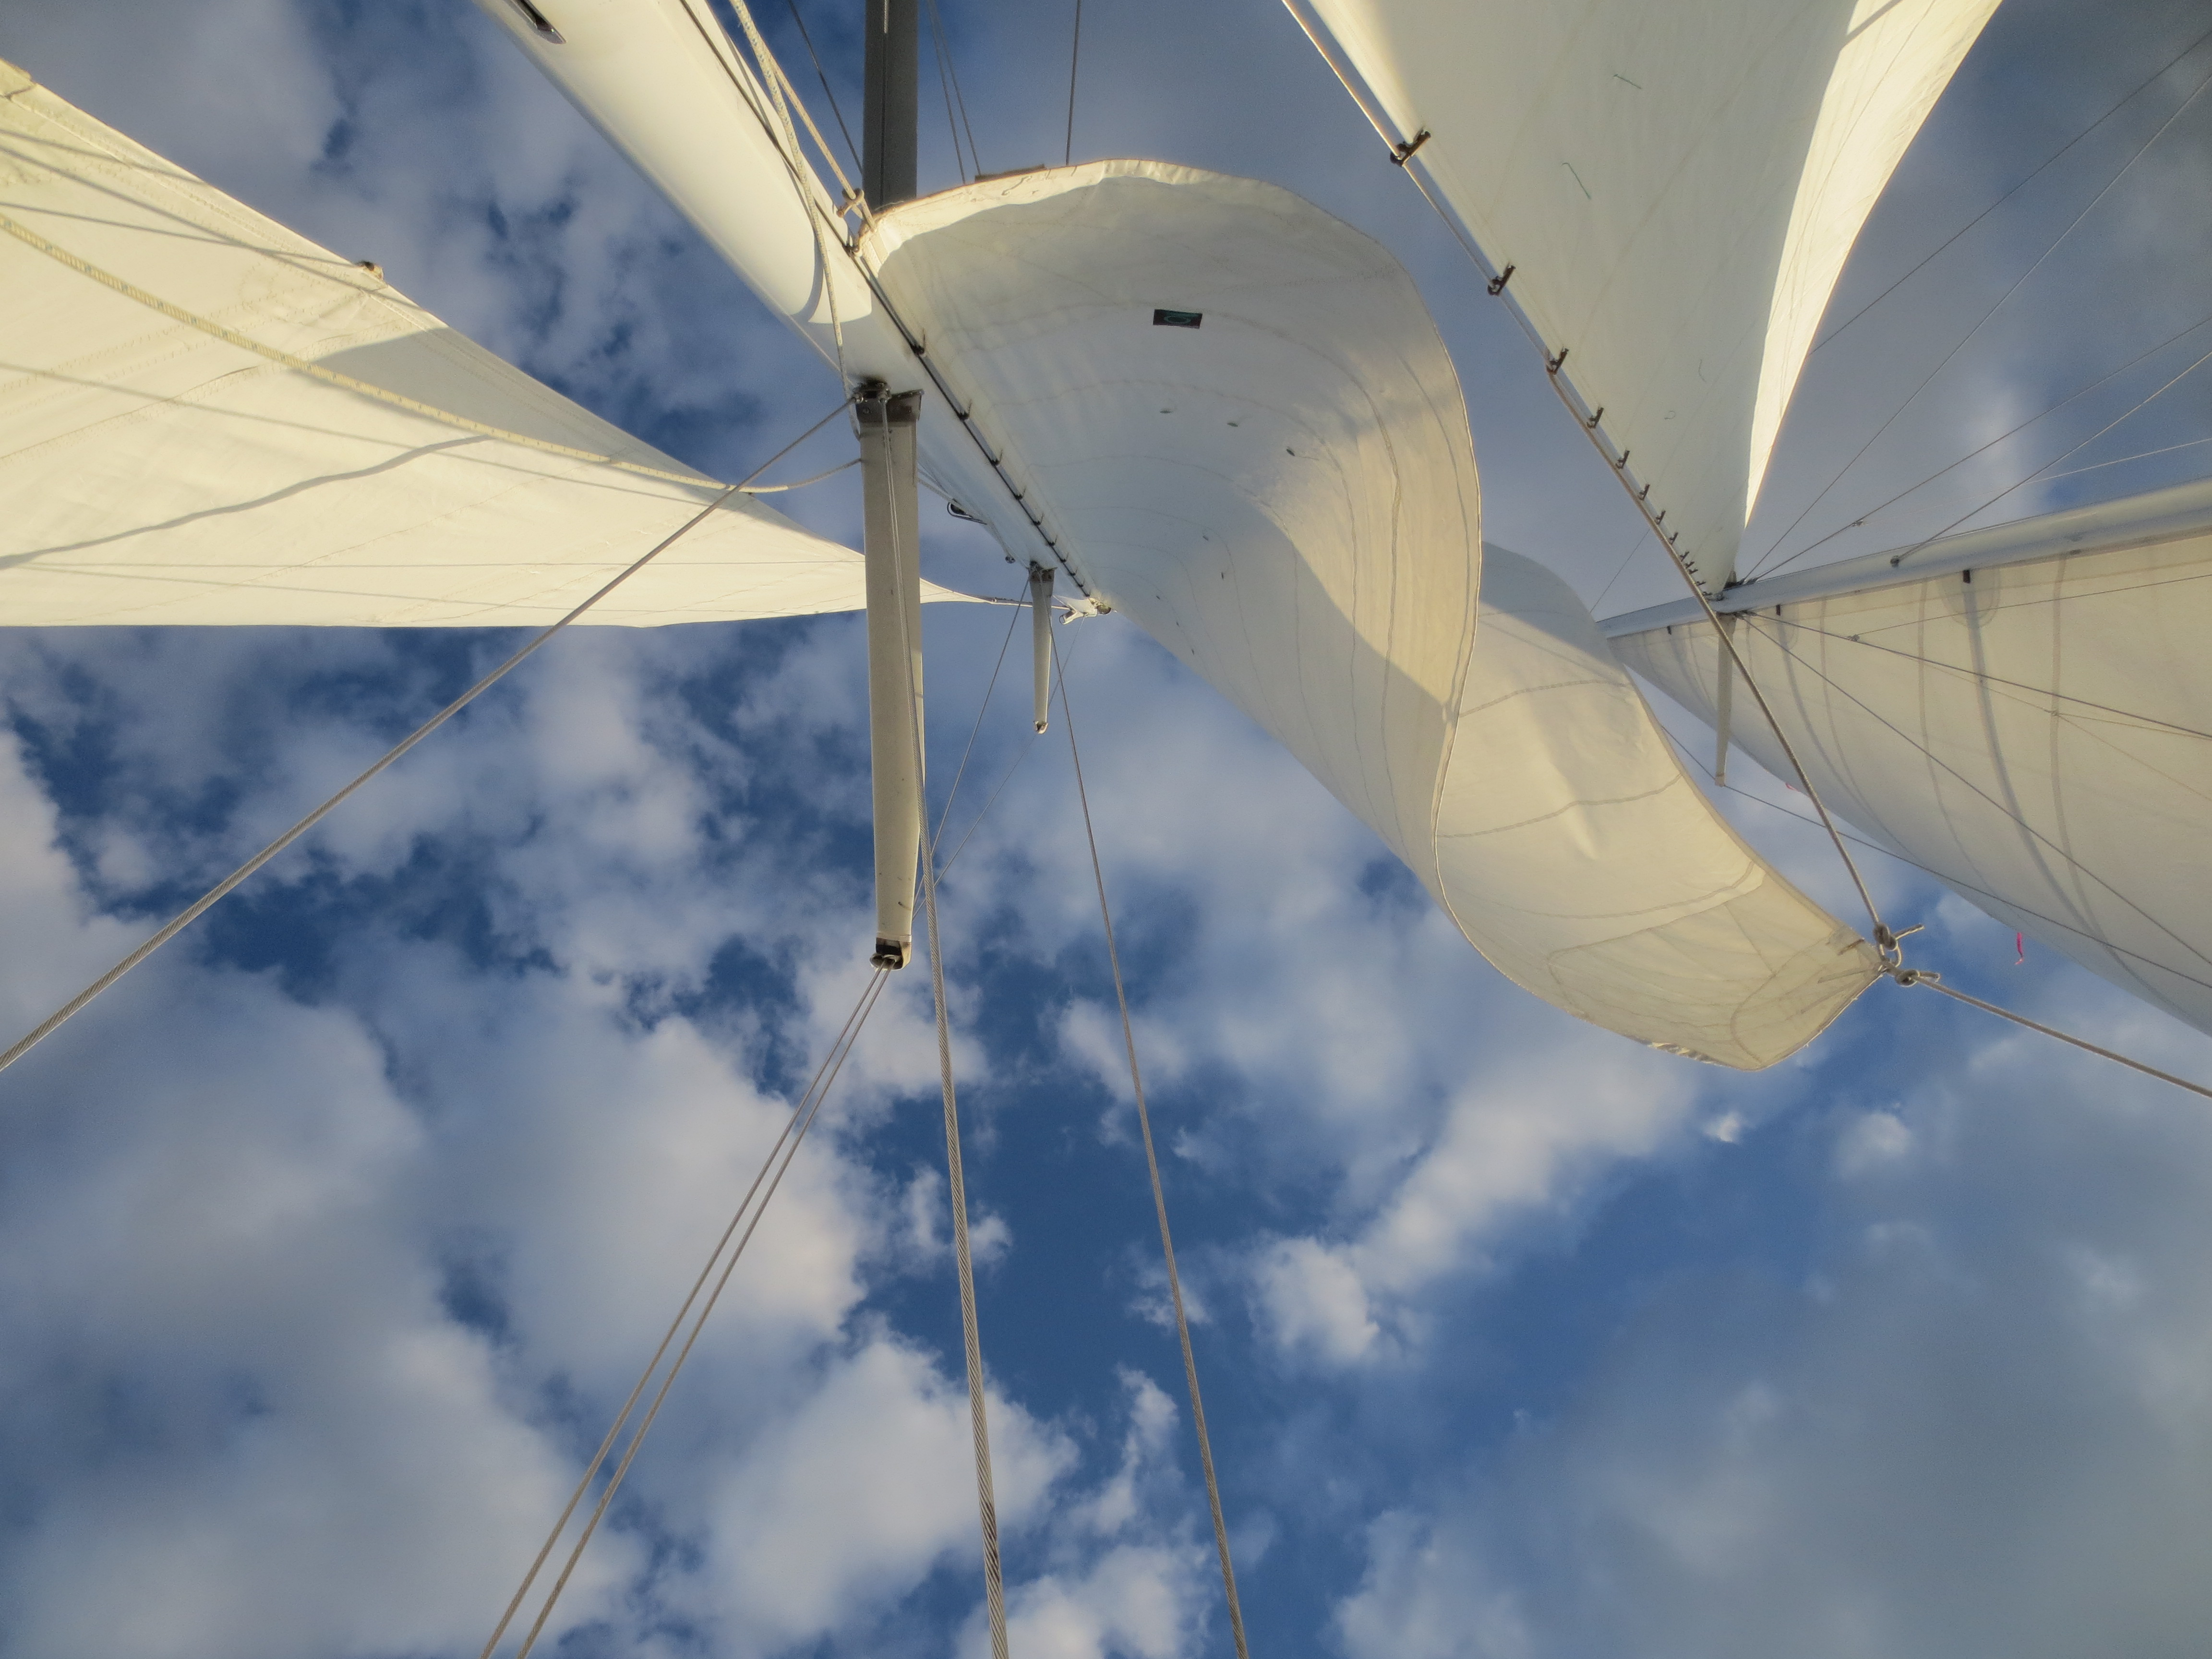 Looking up through the sails of the schooner to blue skies with white clouds